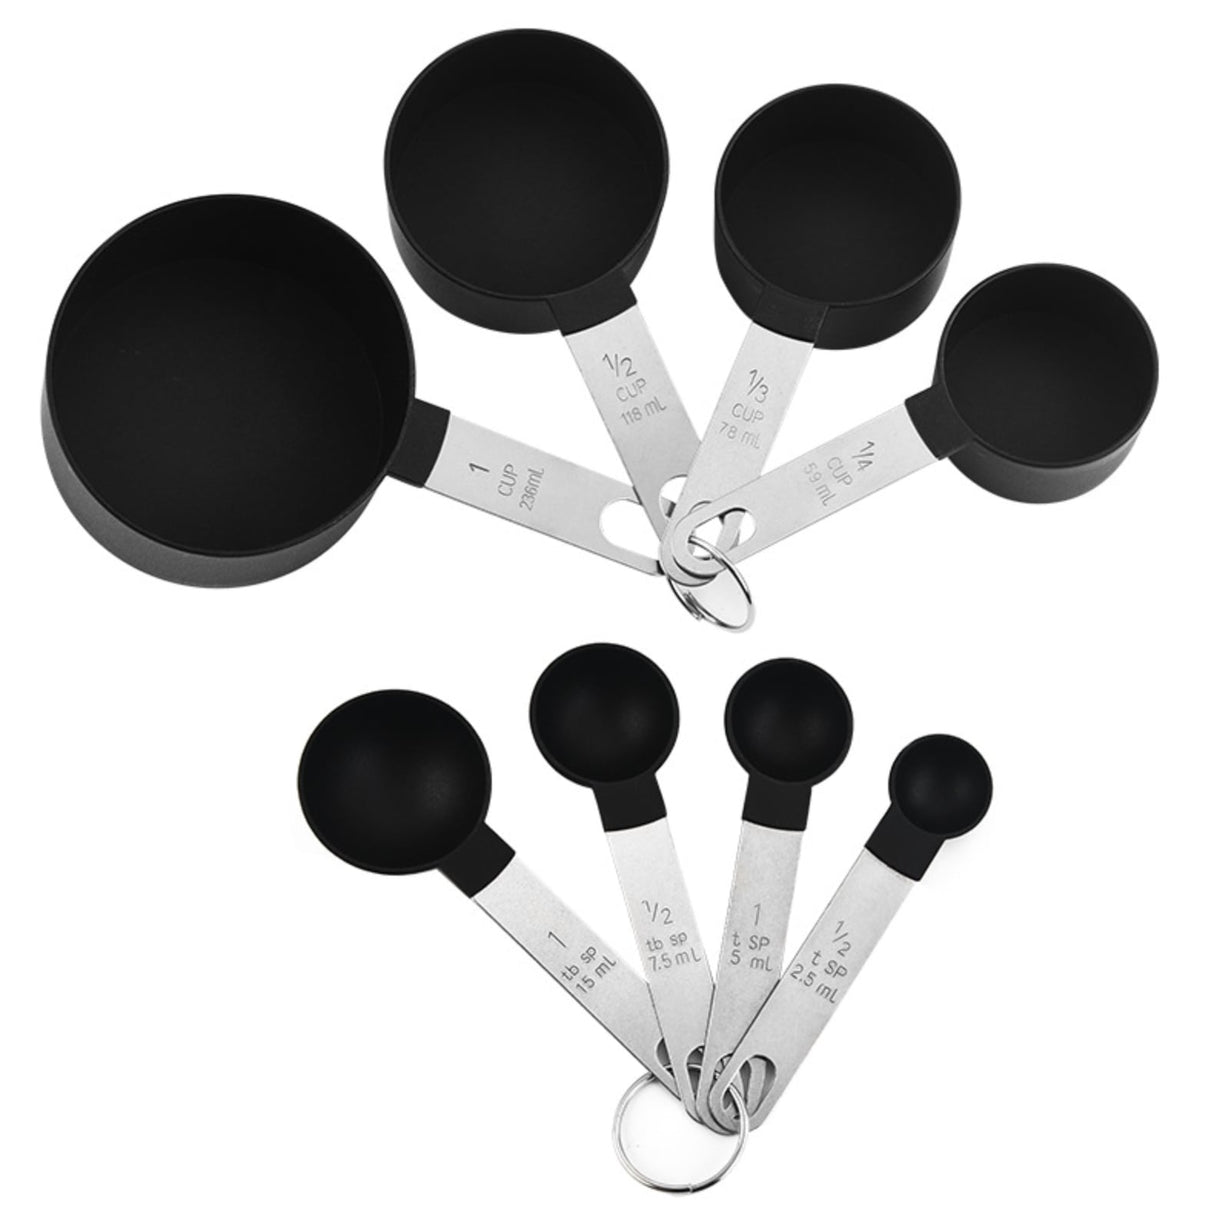 Stackable Measuring Cups And Spoons Set